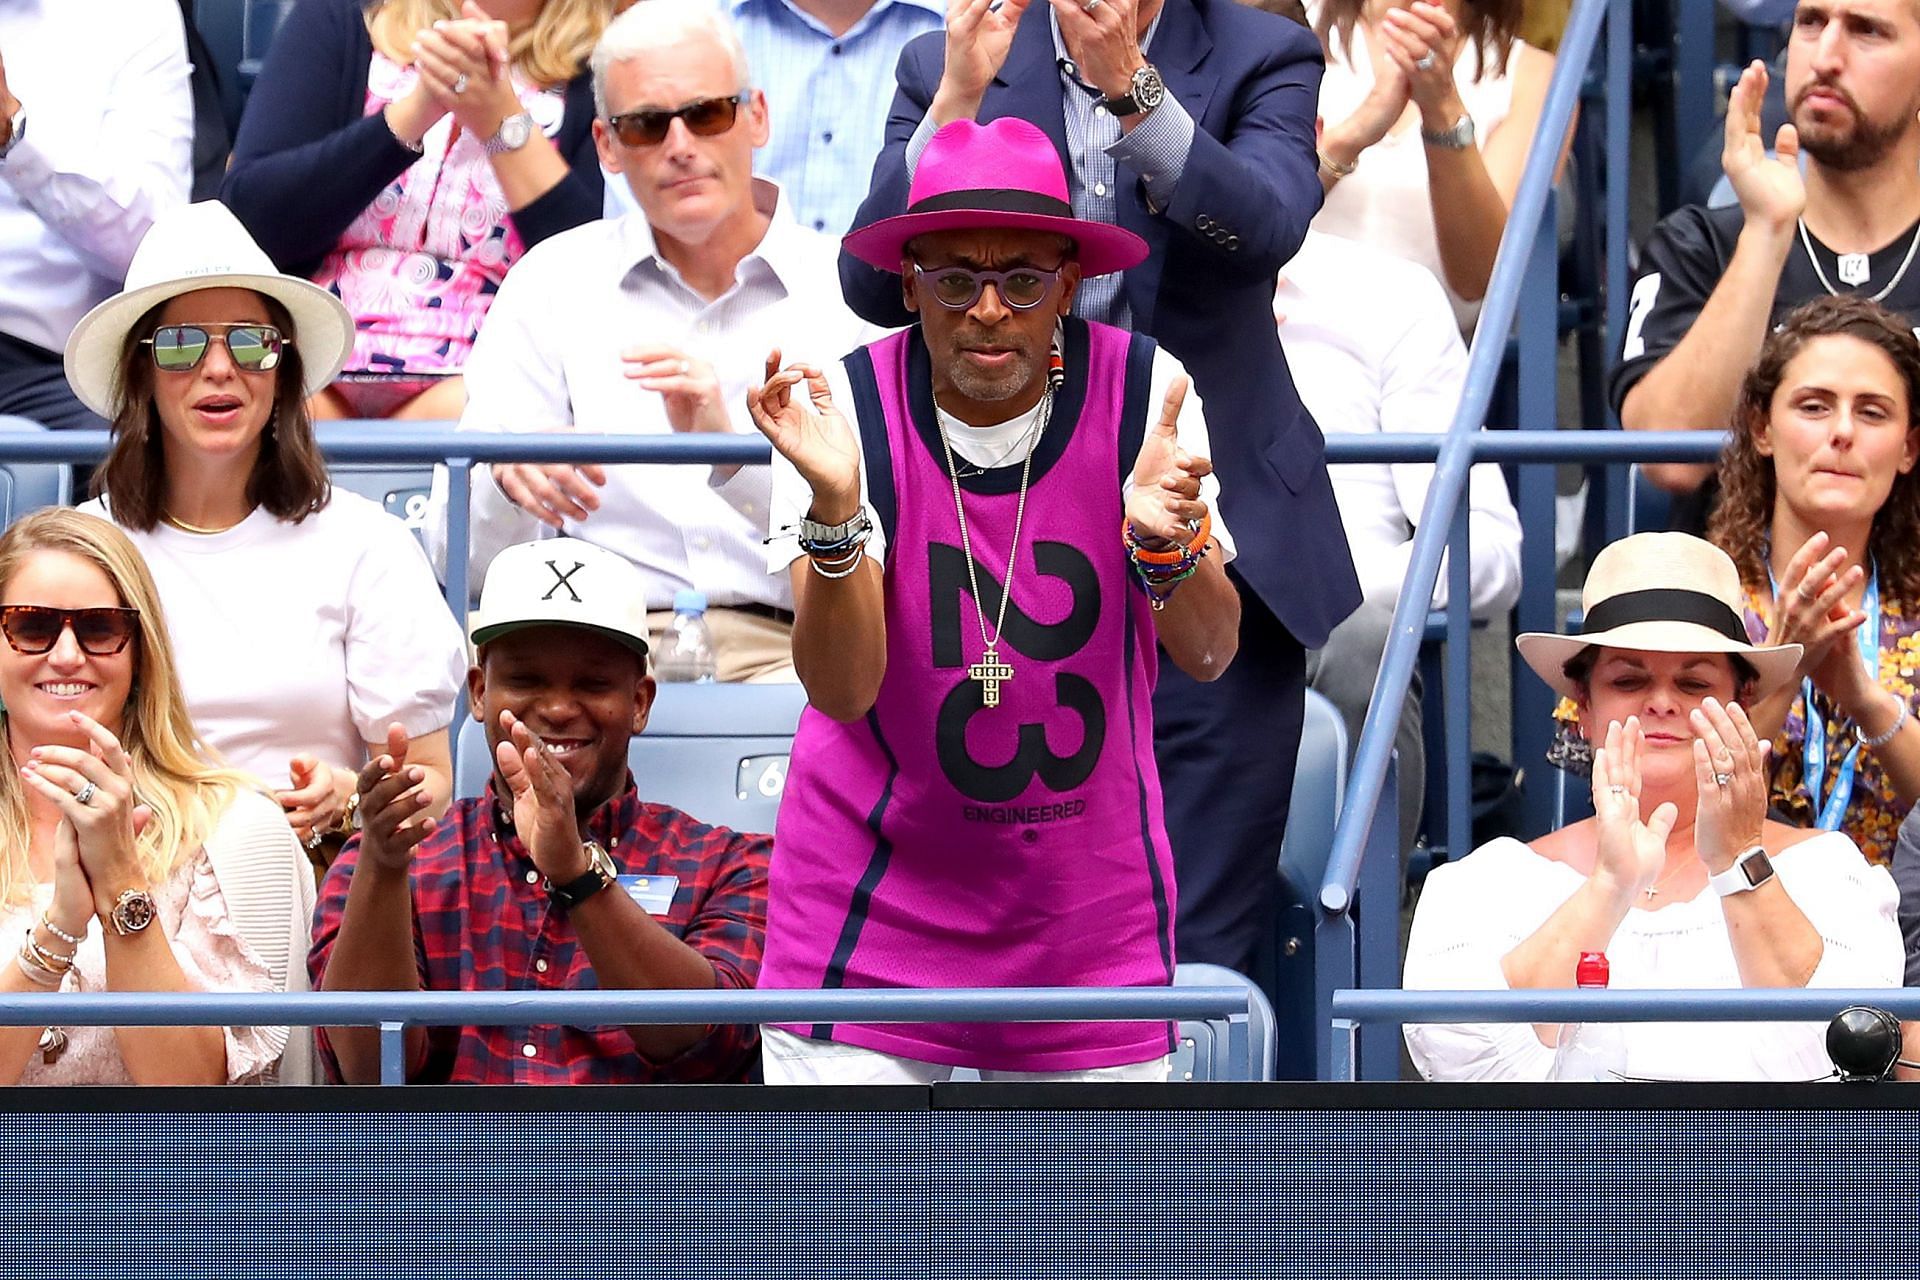 Legendary director Spike Lee cheering for Serena Williams at the 2019 US Open.